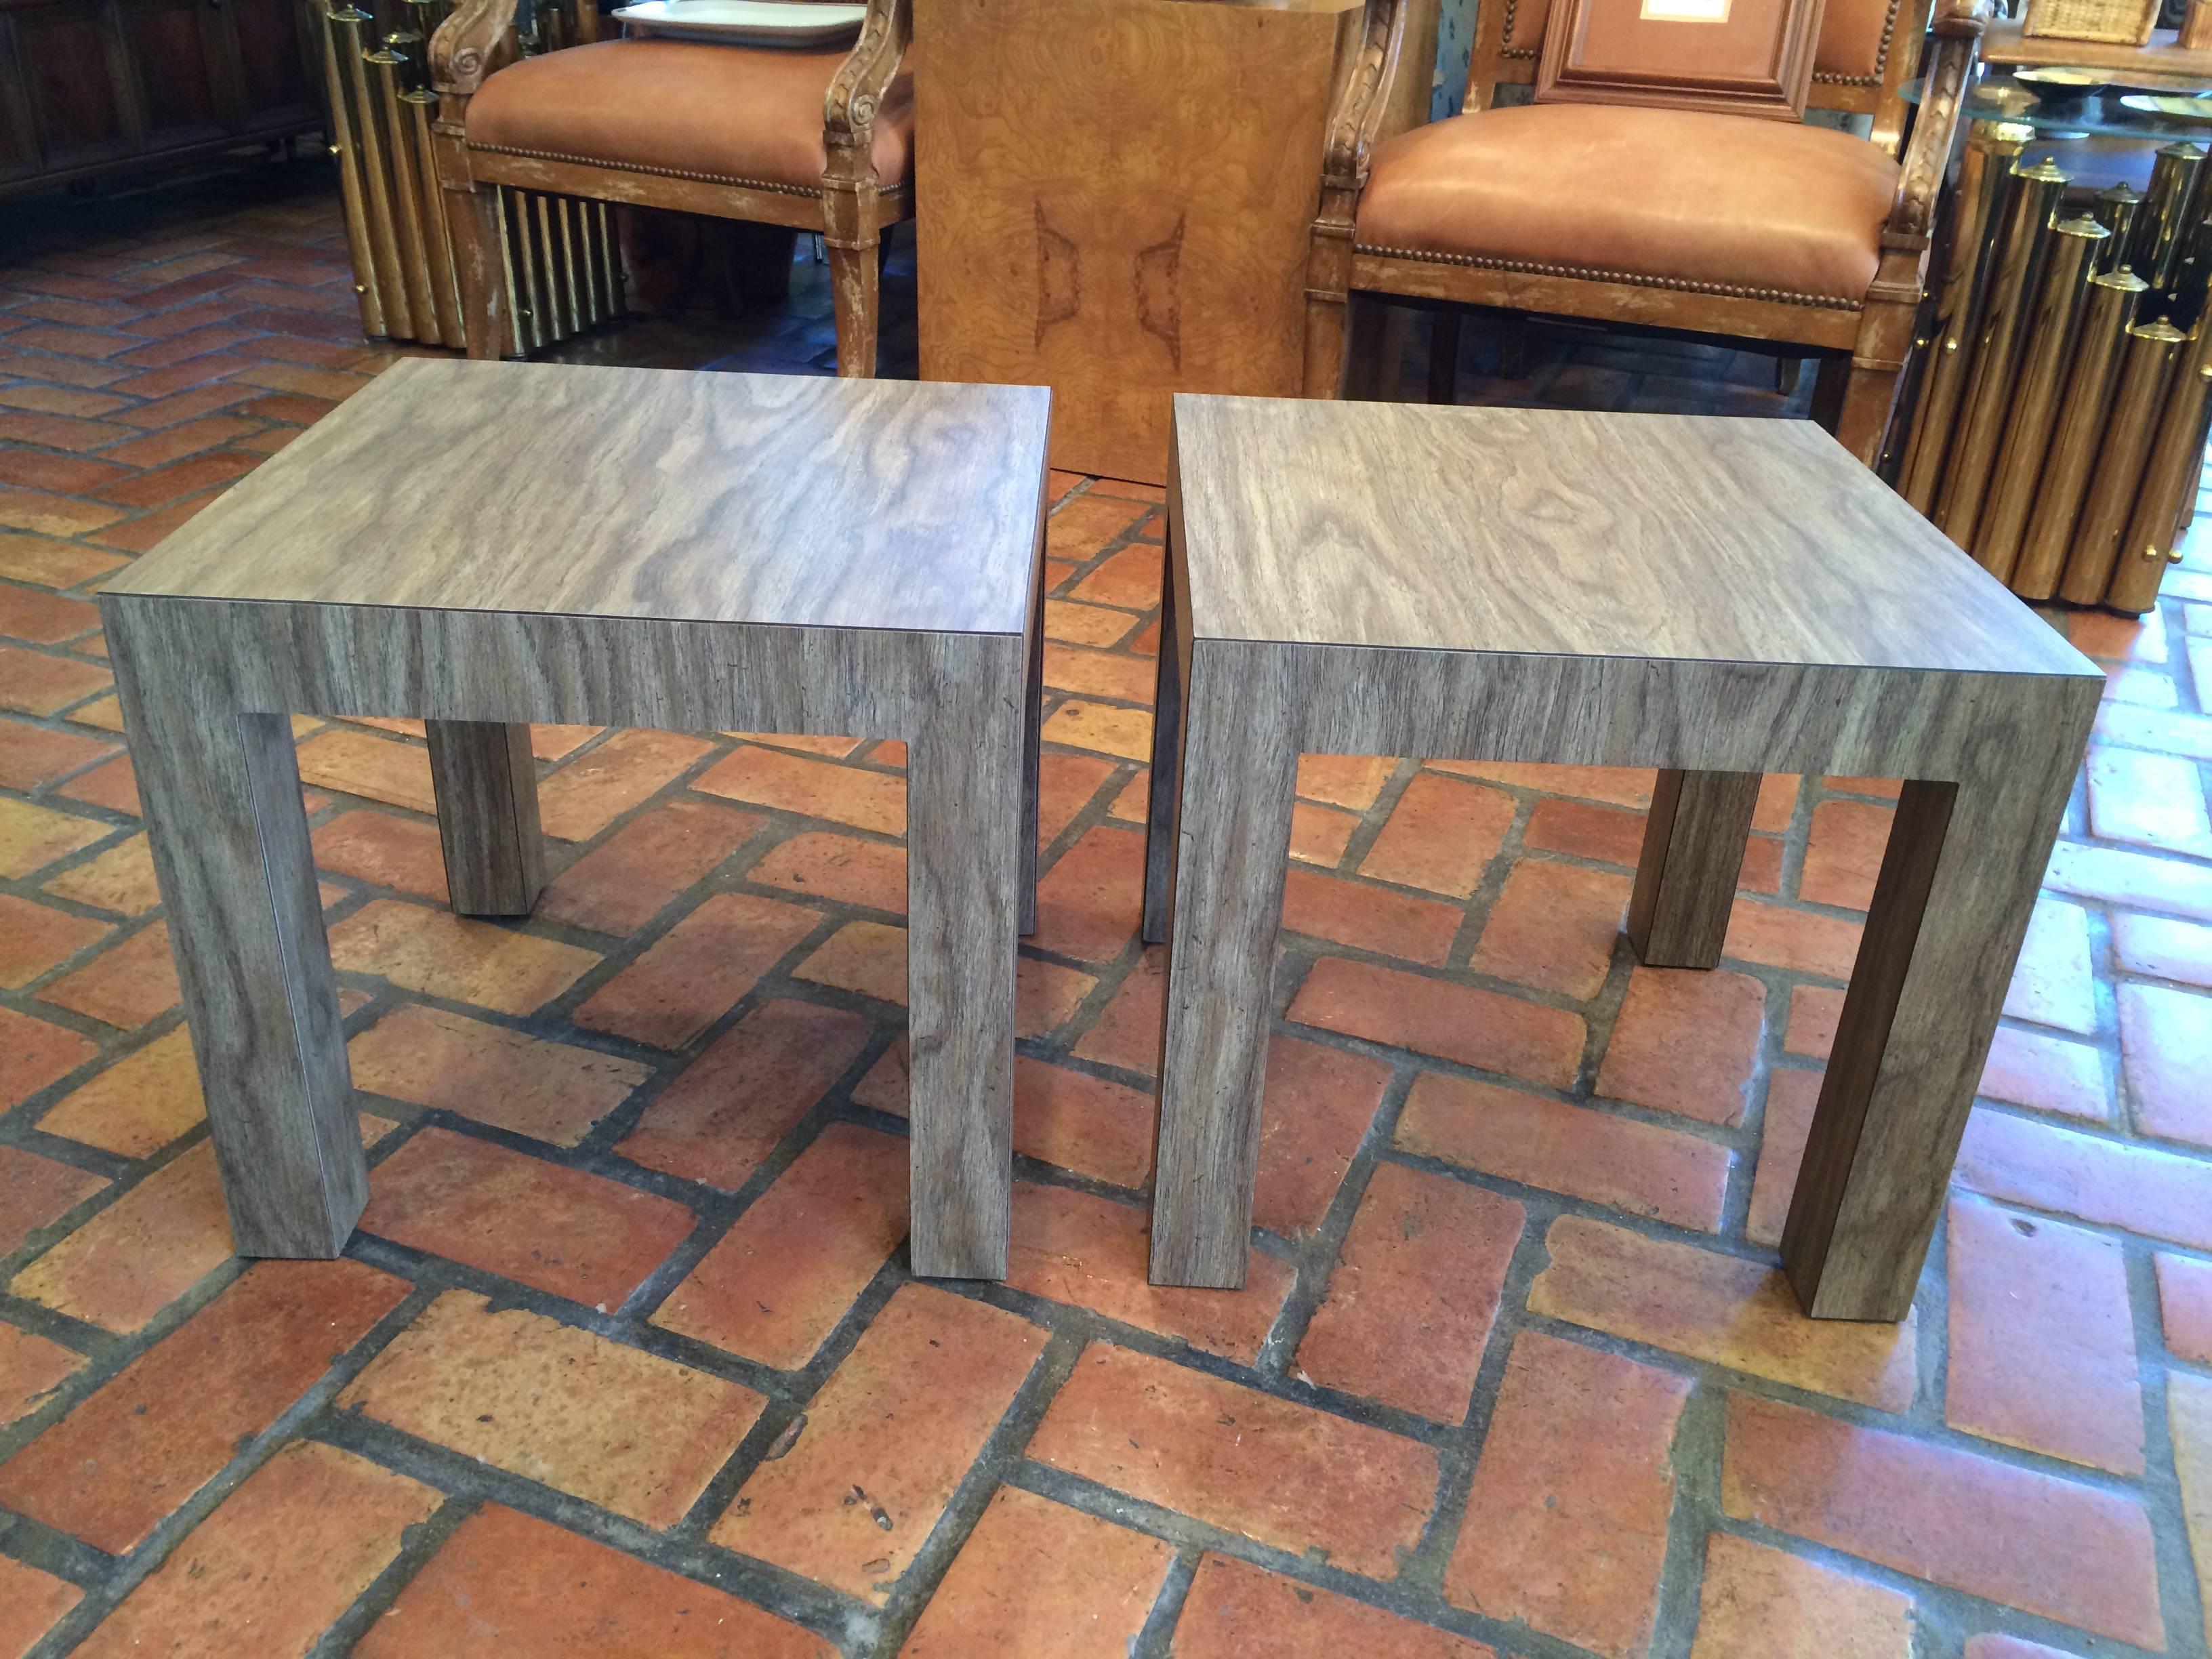 Pair of wood grain parsons end tables. Small and easy to move around. Laminated in a faux cerused oak look.